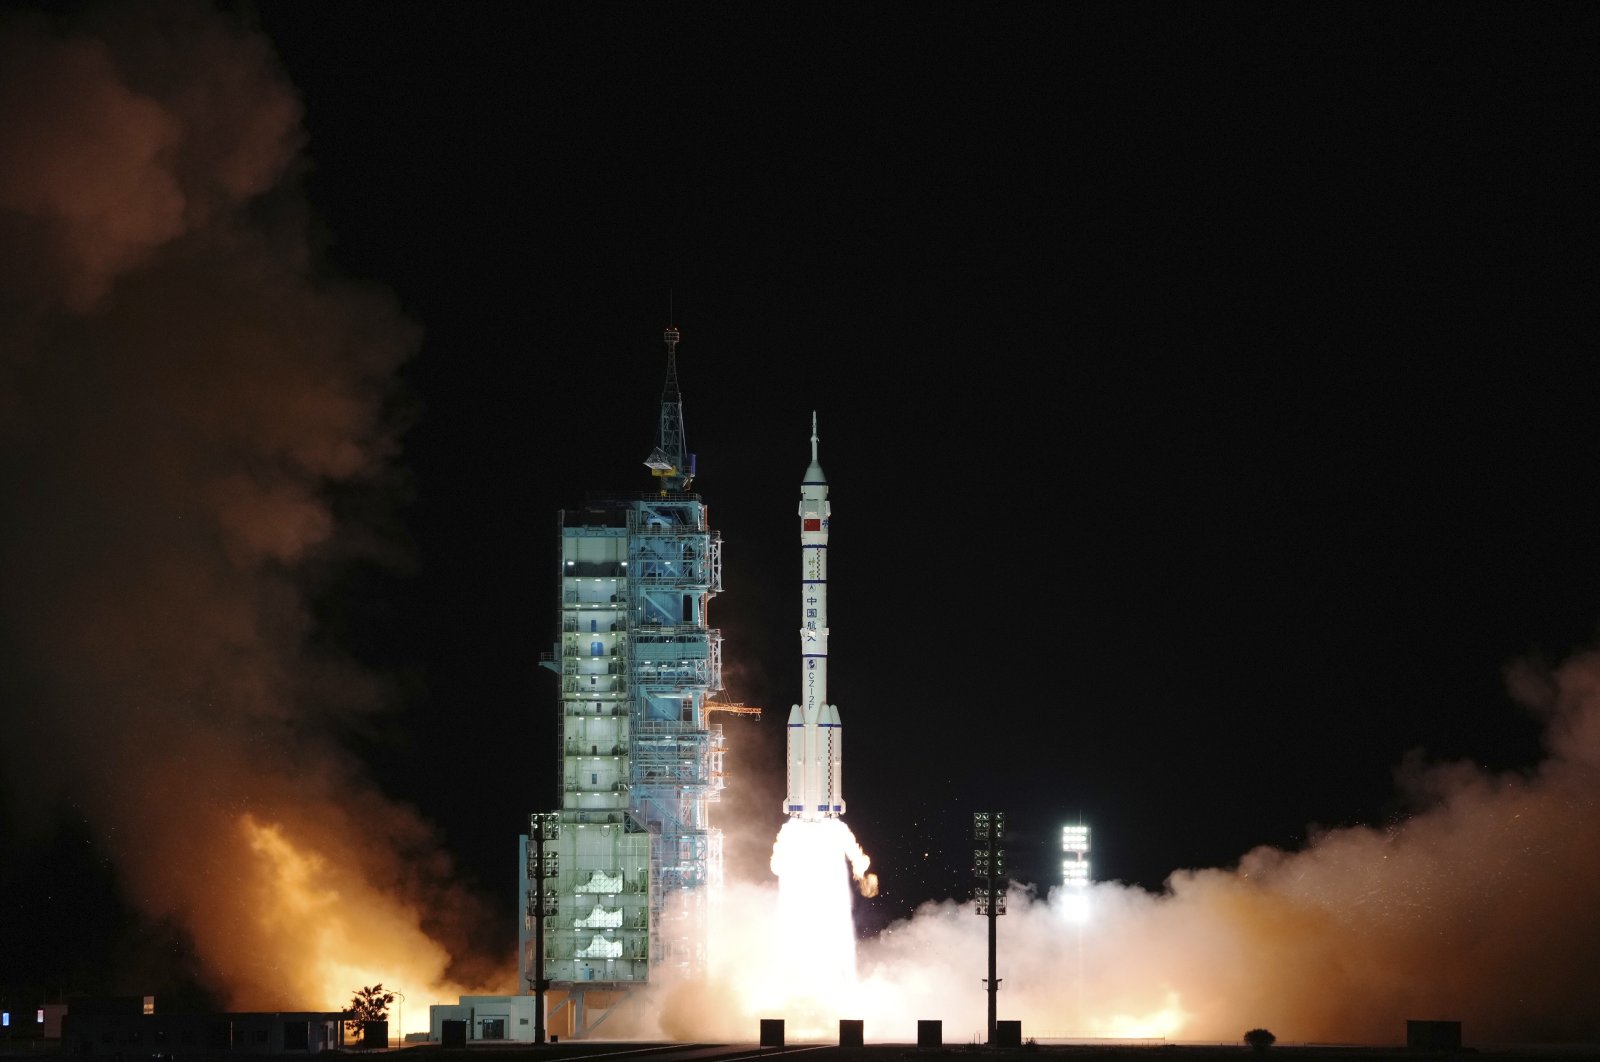 The crewed spaceship Shenzhou-13, atop a Long March-2F carrier rocket, is launched from the Jiuquan Satellite Launch Center in northwest China's Gobi Desert, Oct. 16, 2021. (Xinhua via AP)